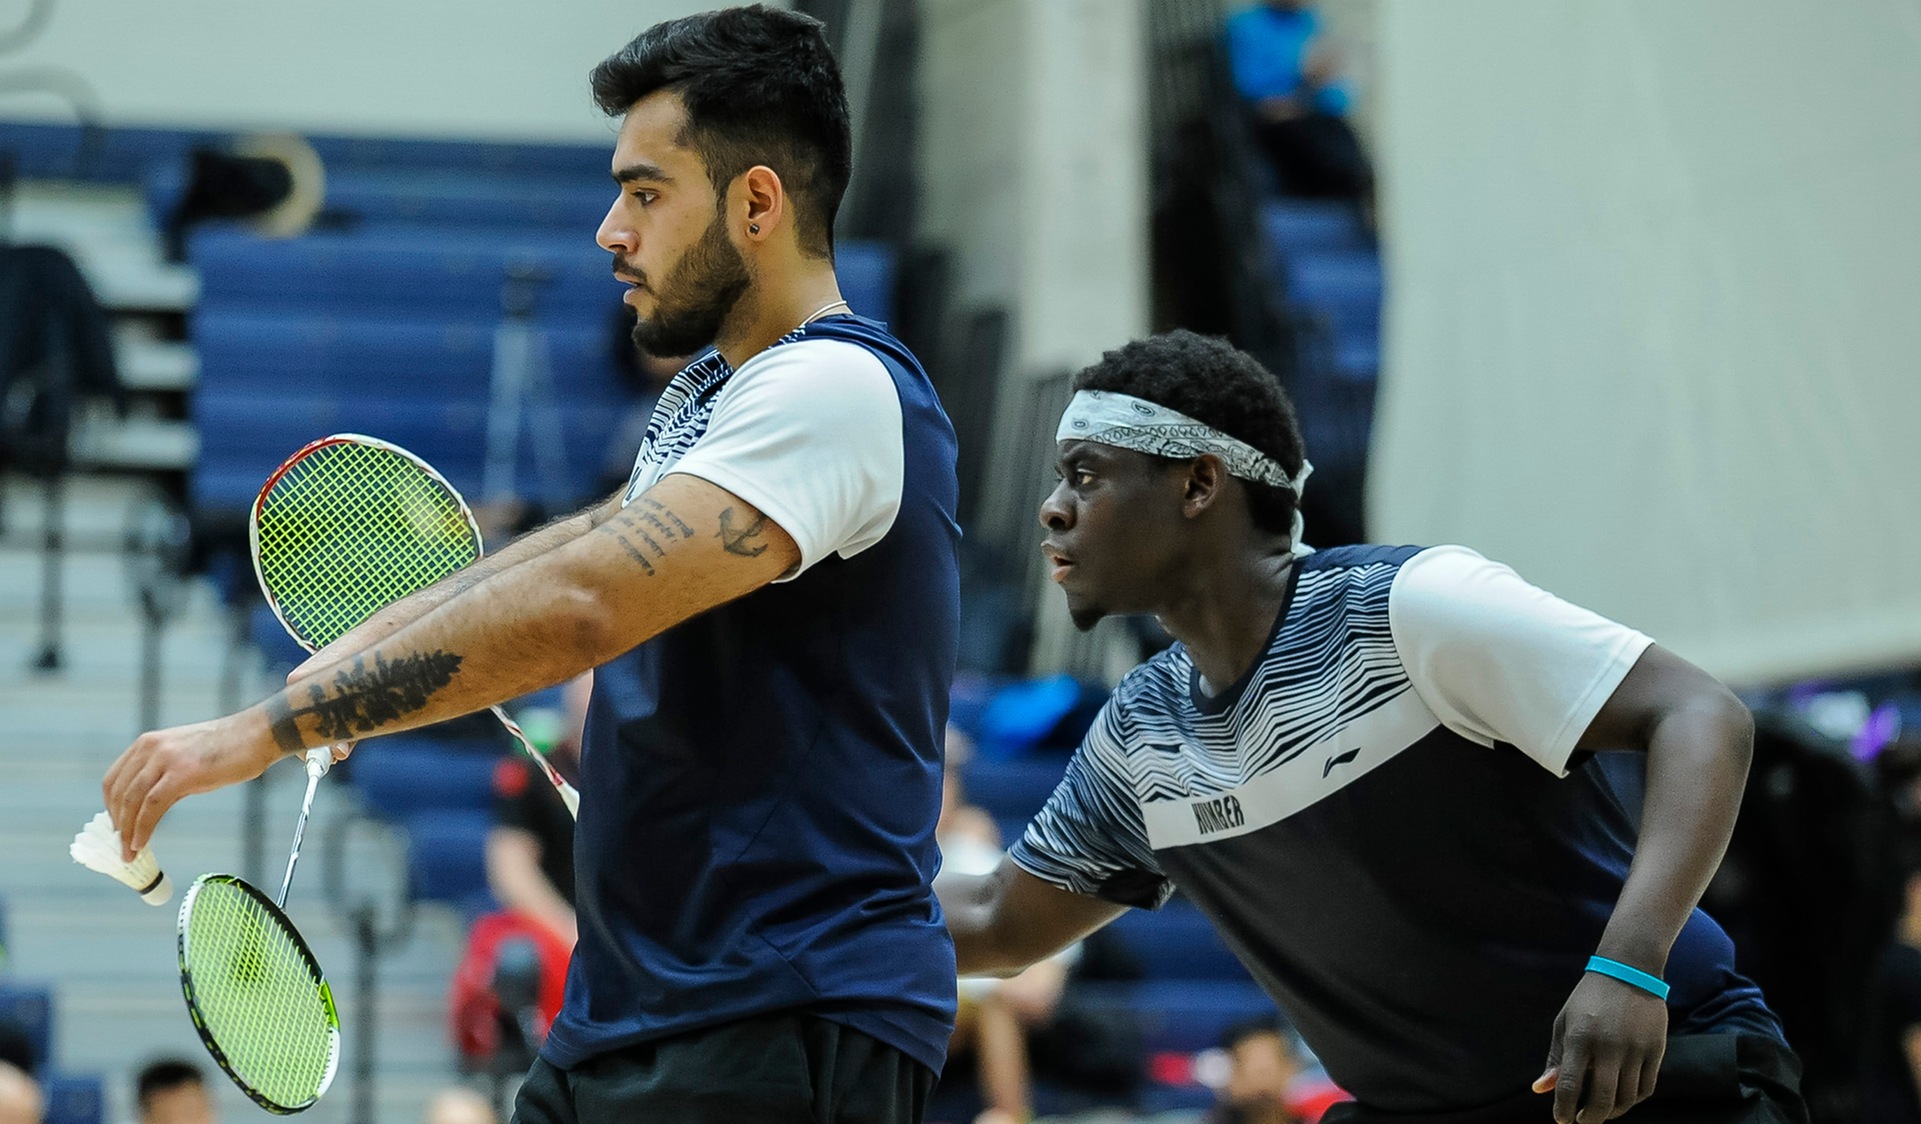 HAWKS BADMINTON DUO OF TOURAY & TANEJA ROLL TO MEN’S DOUBLES GOLD